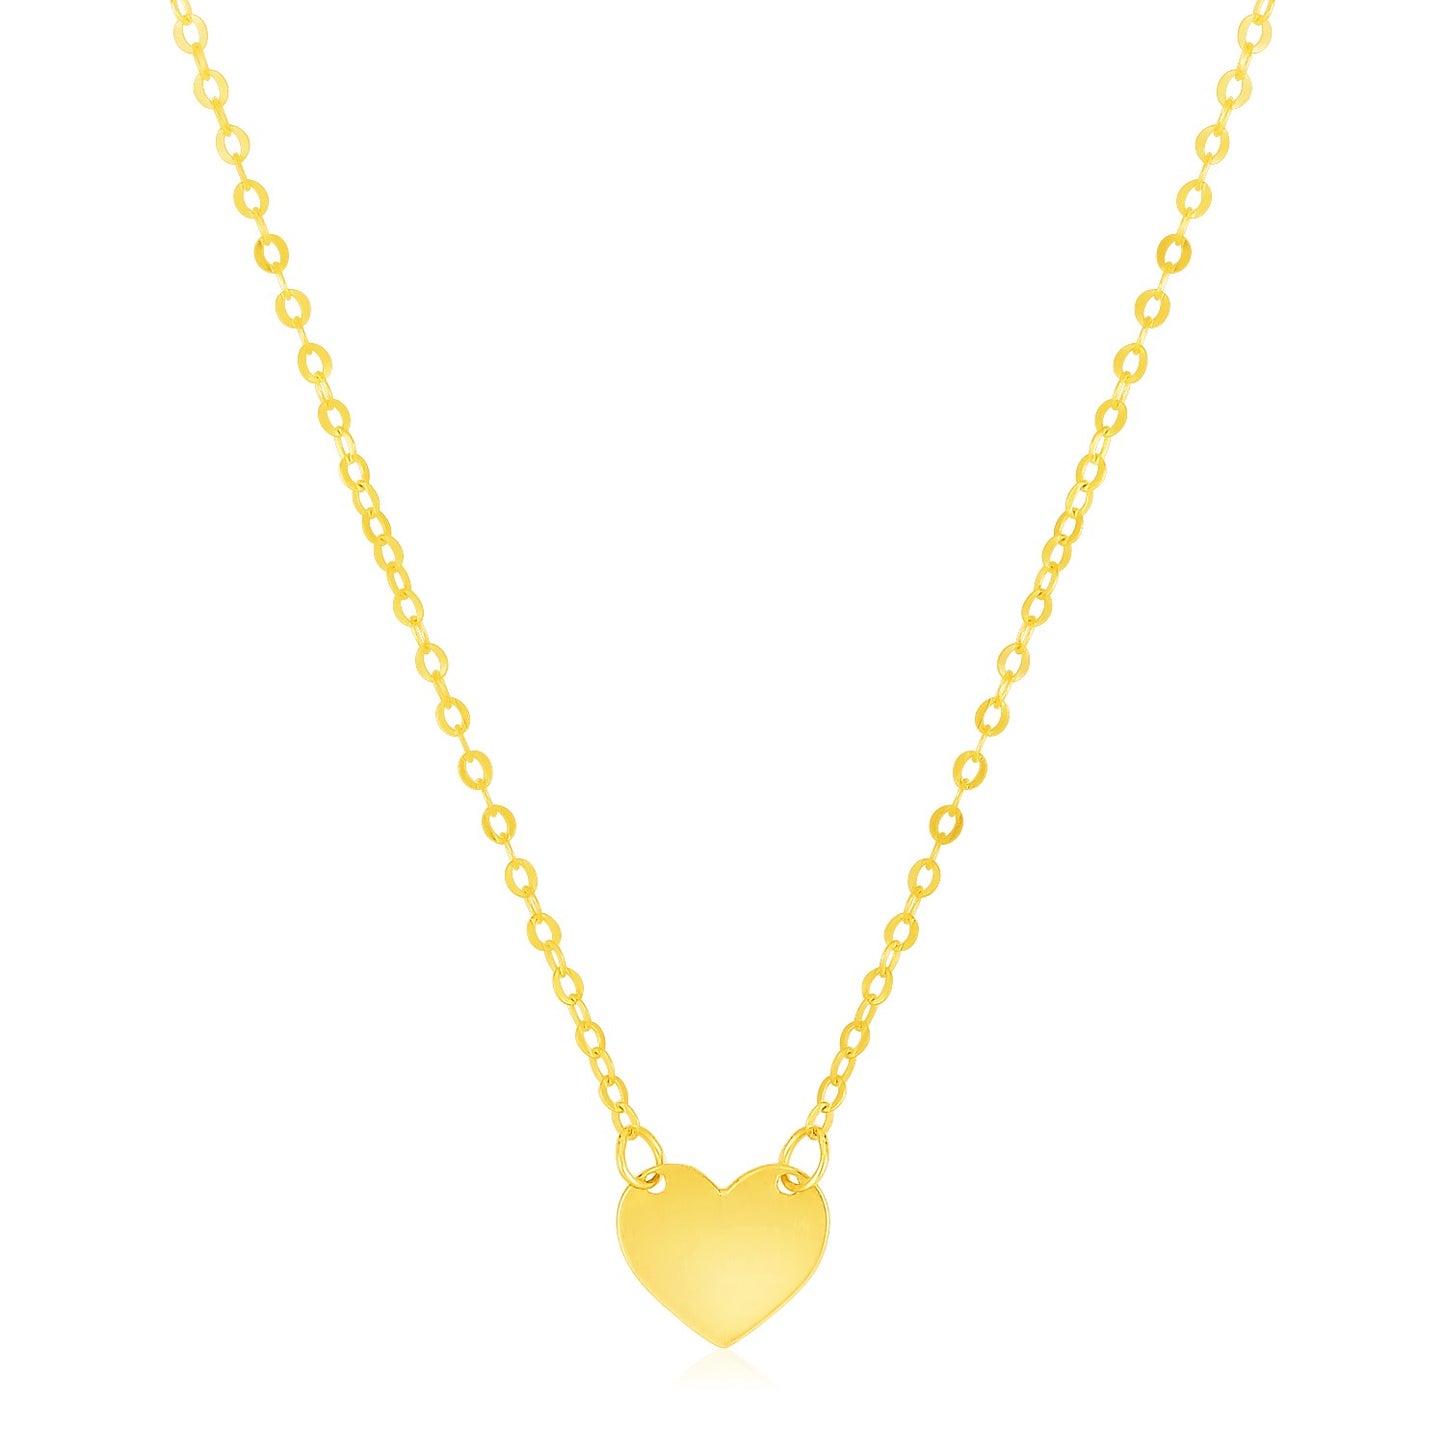 Mini Heart Necklace in 14k Yellow Gold